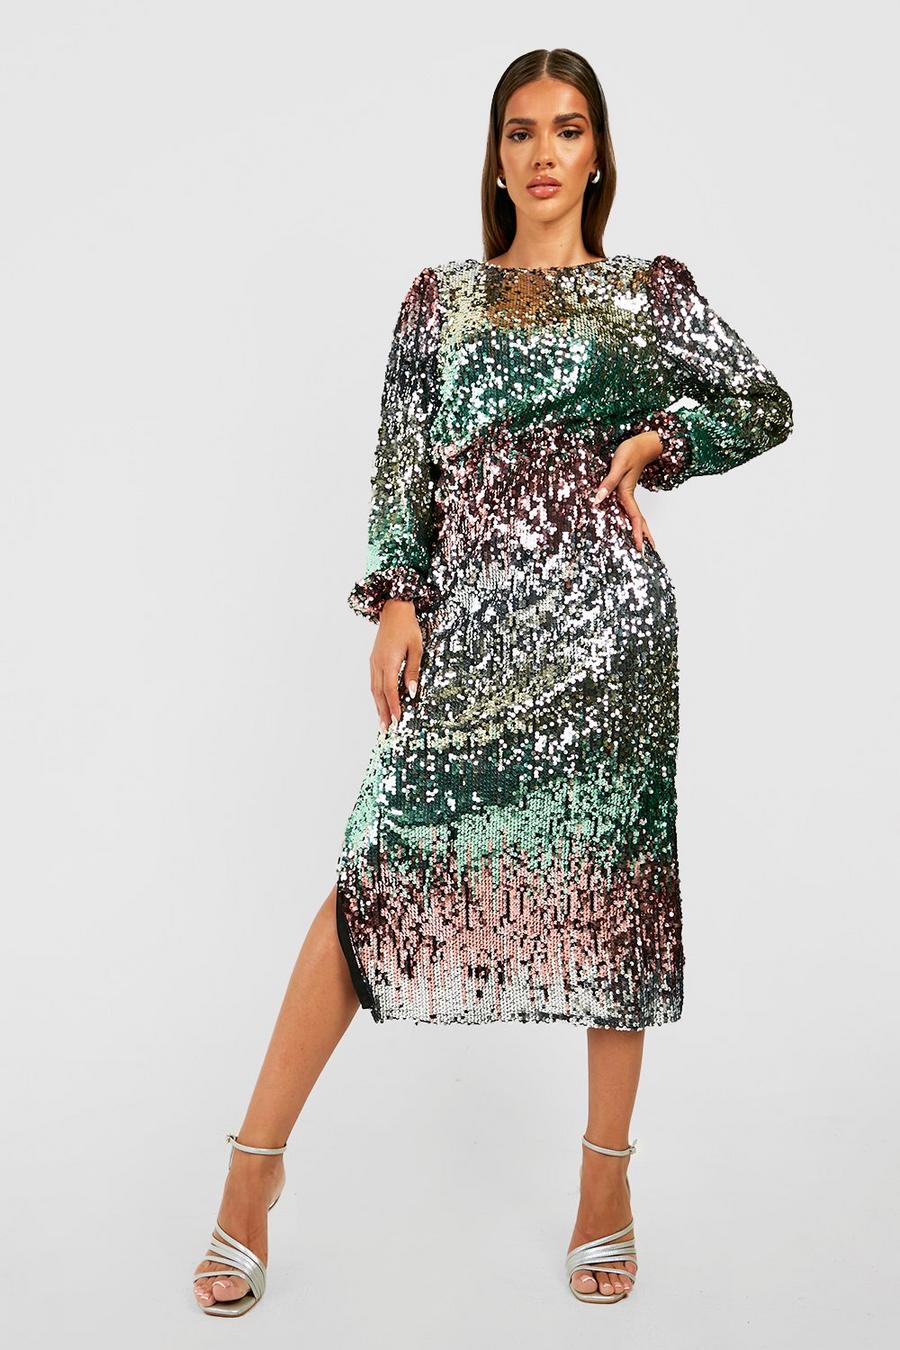 Blush Sequin Ombre Midaxi Party Dress